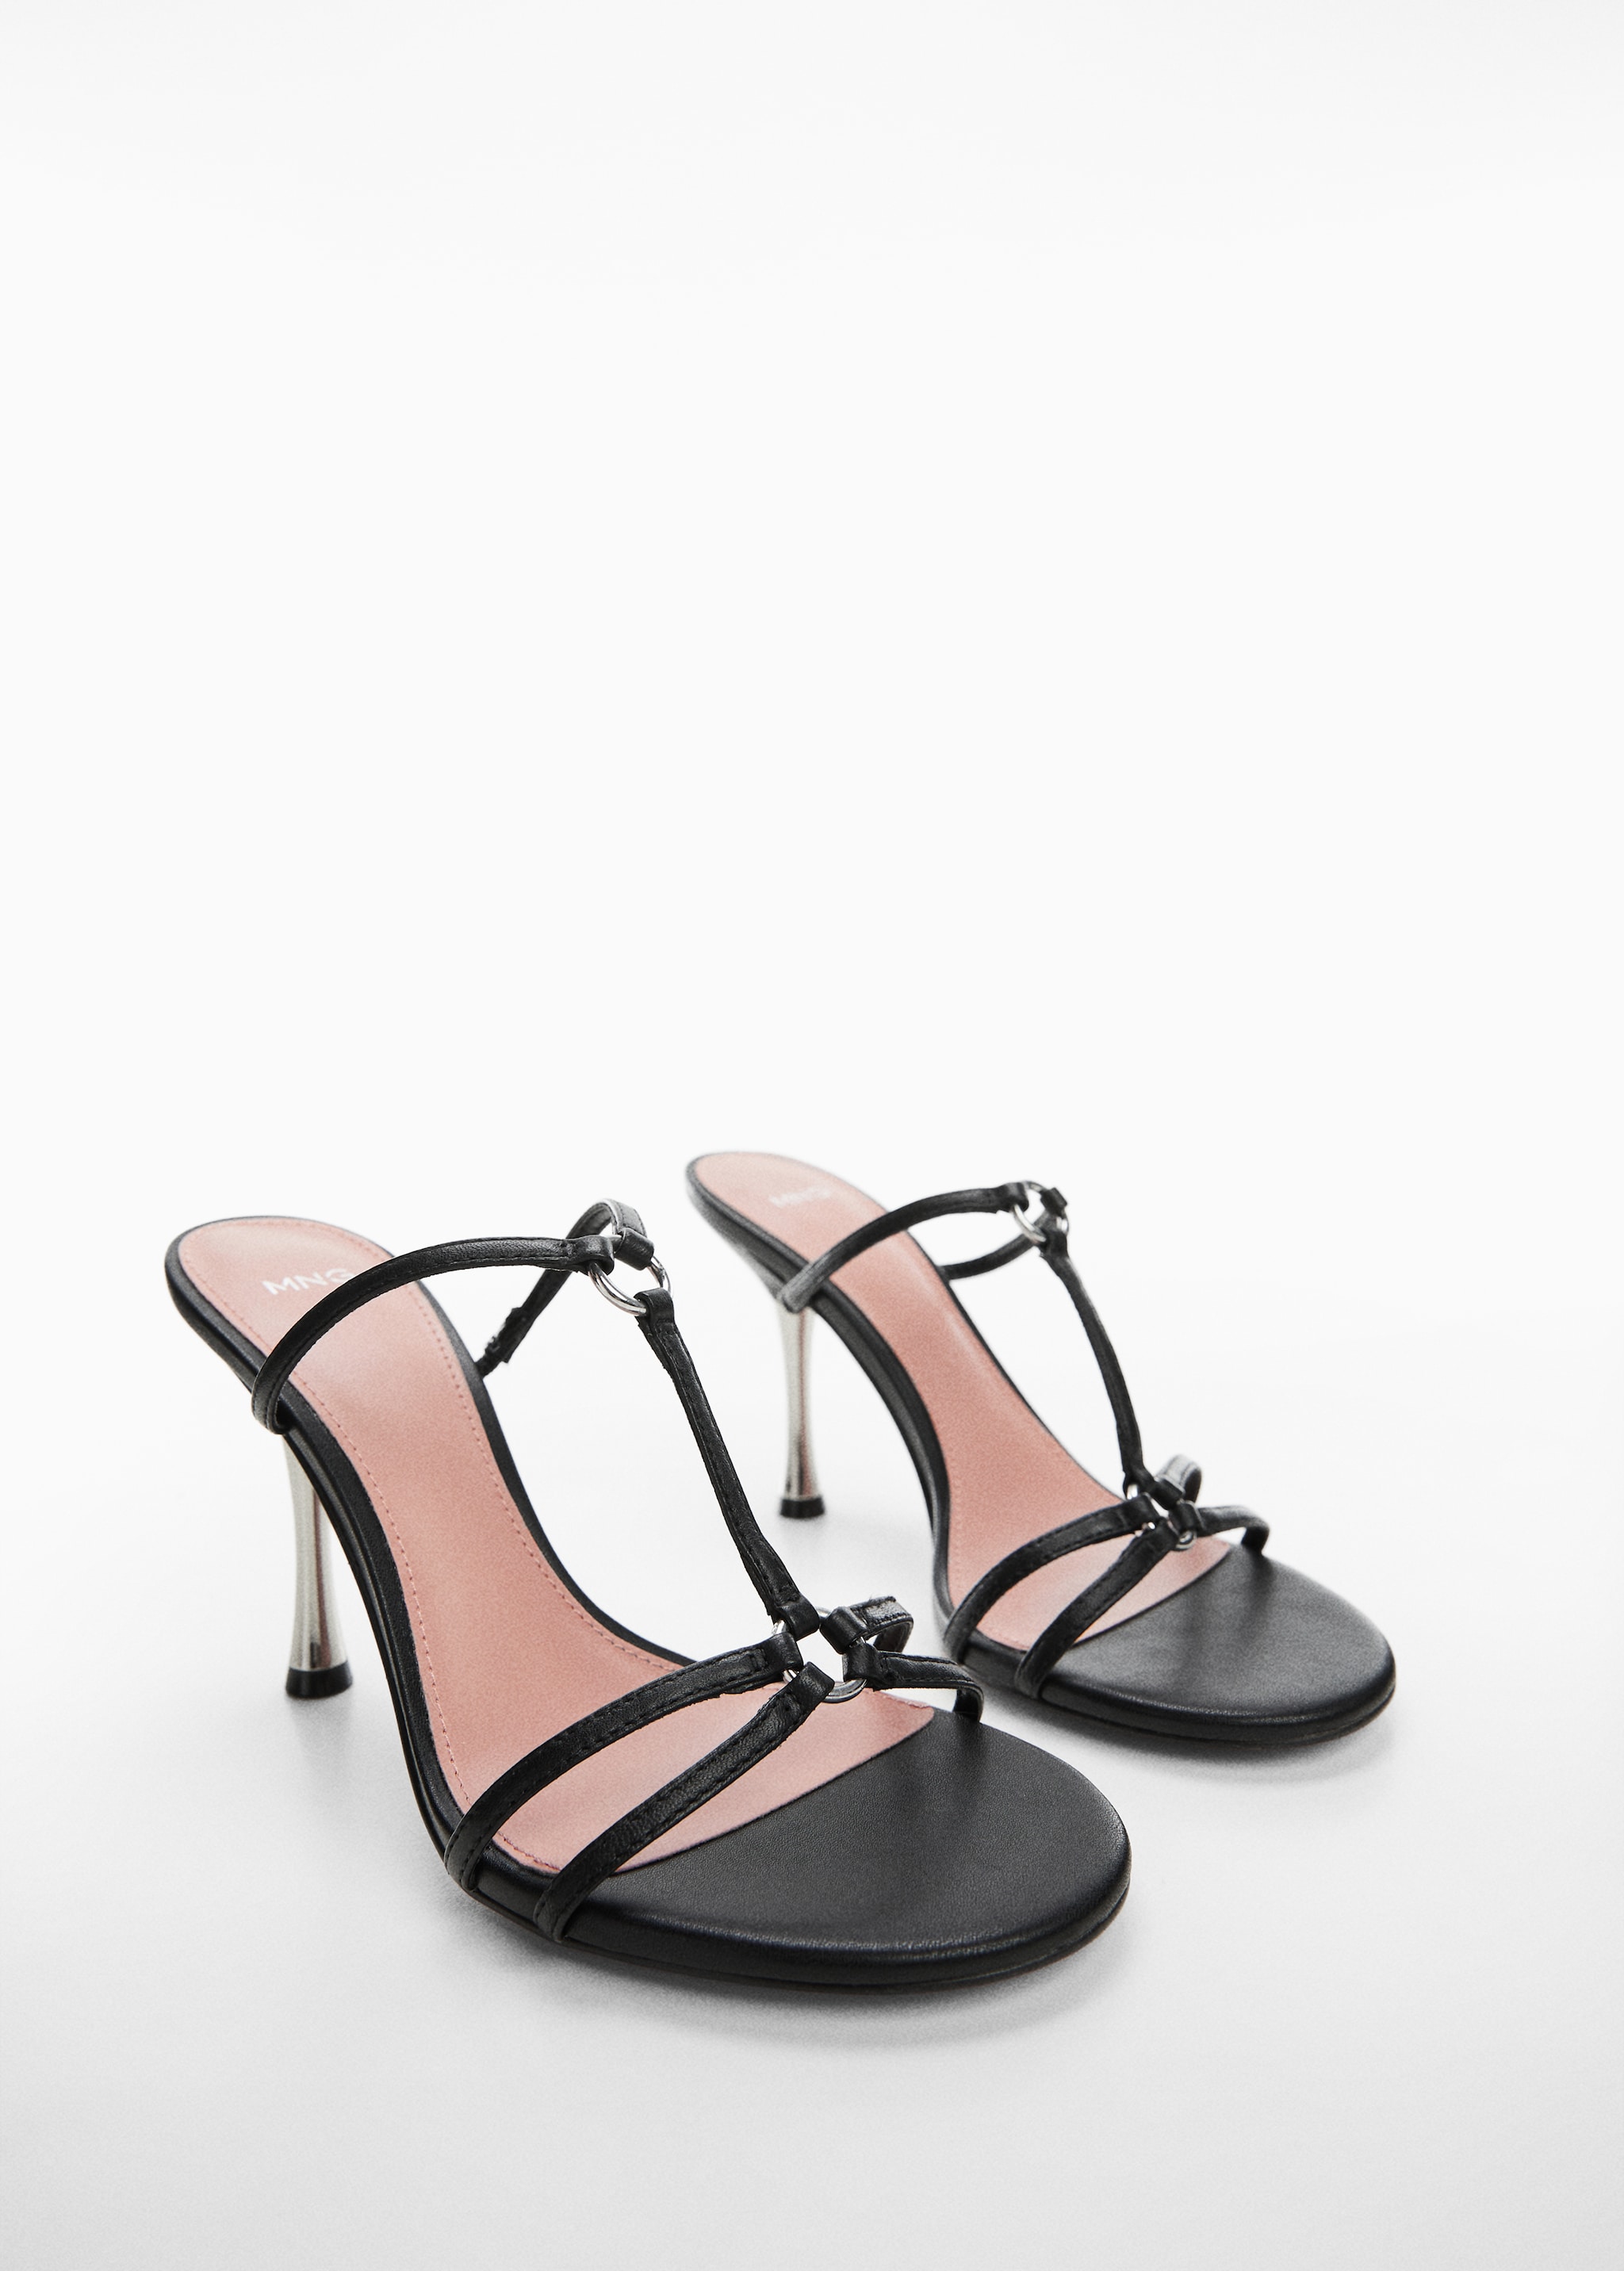 Heeled leather sandals with straps - Medium plane